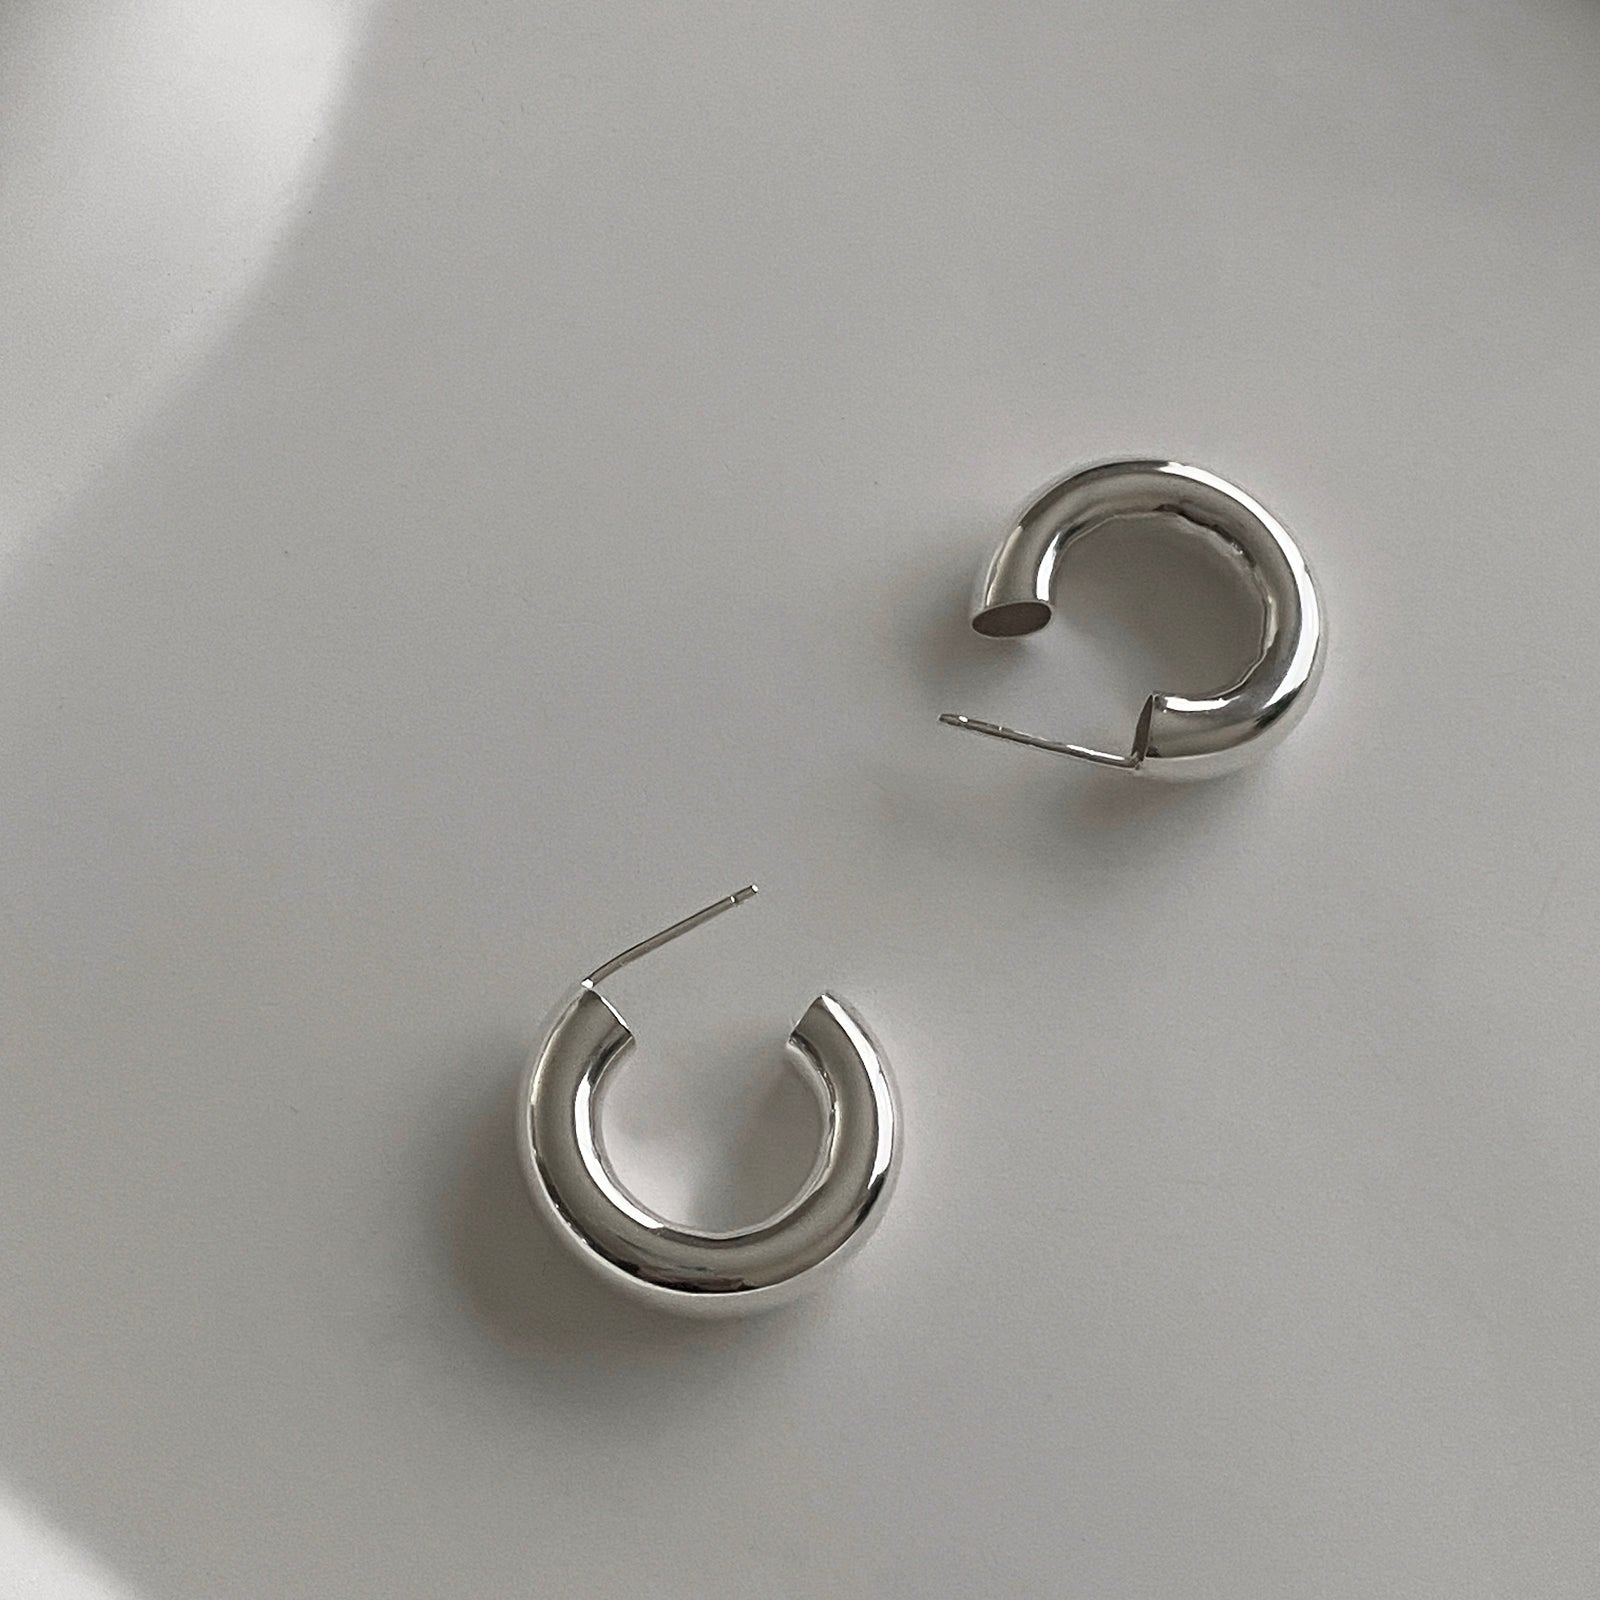 Side view of the Hollow Tube Hoops. These hoop earrings are made of 925 sterling silver with a push back for closure. These earrings are lightweight and hollow.